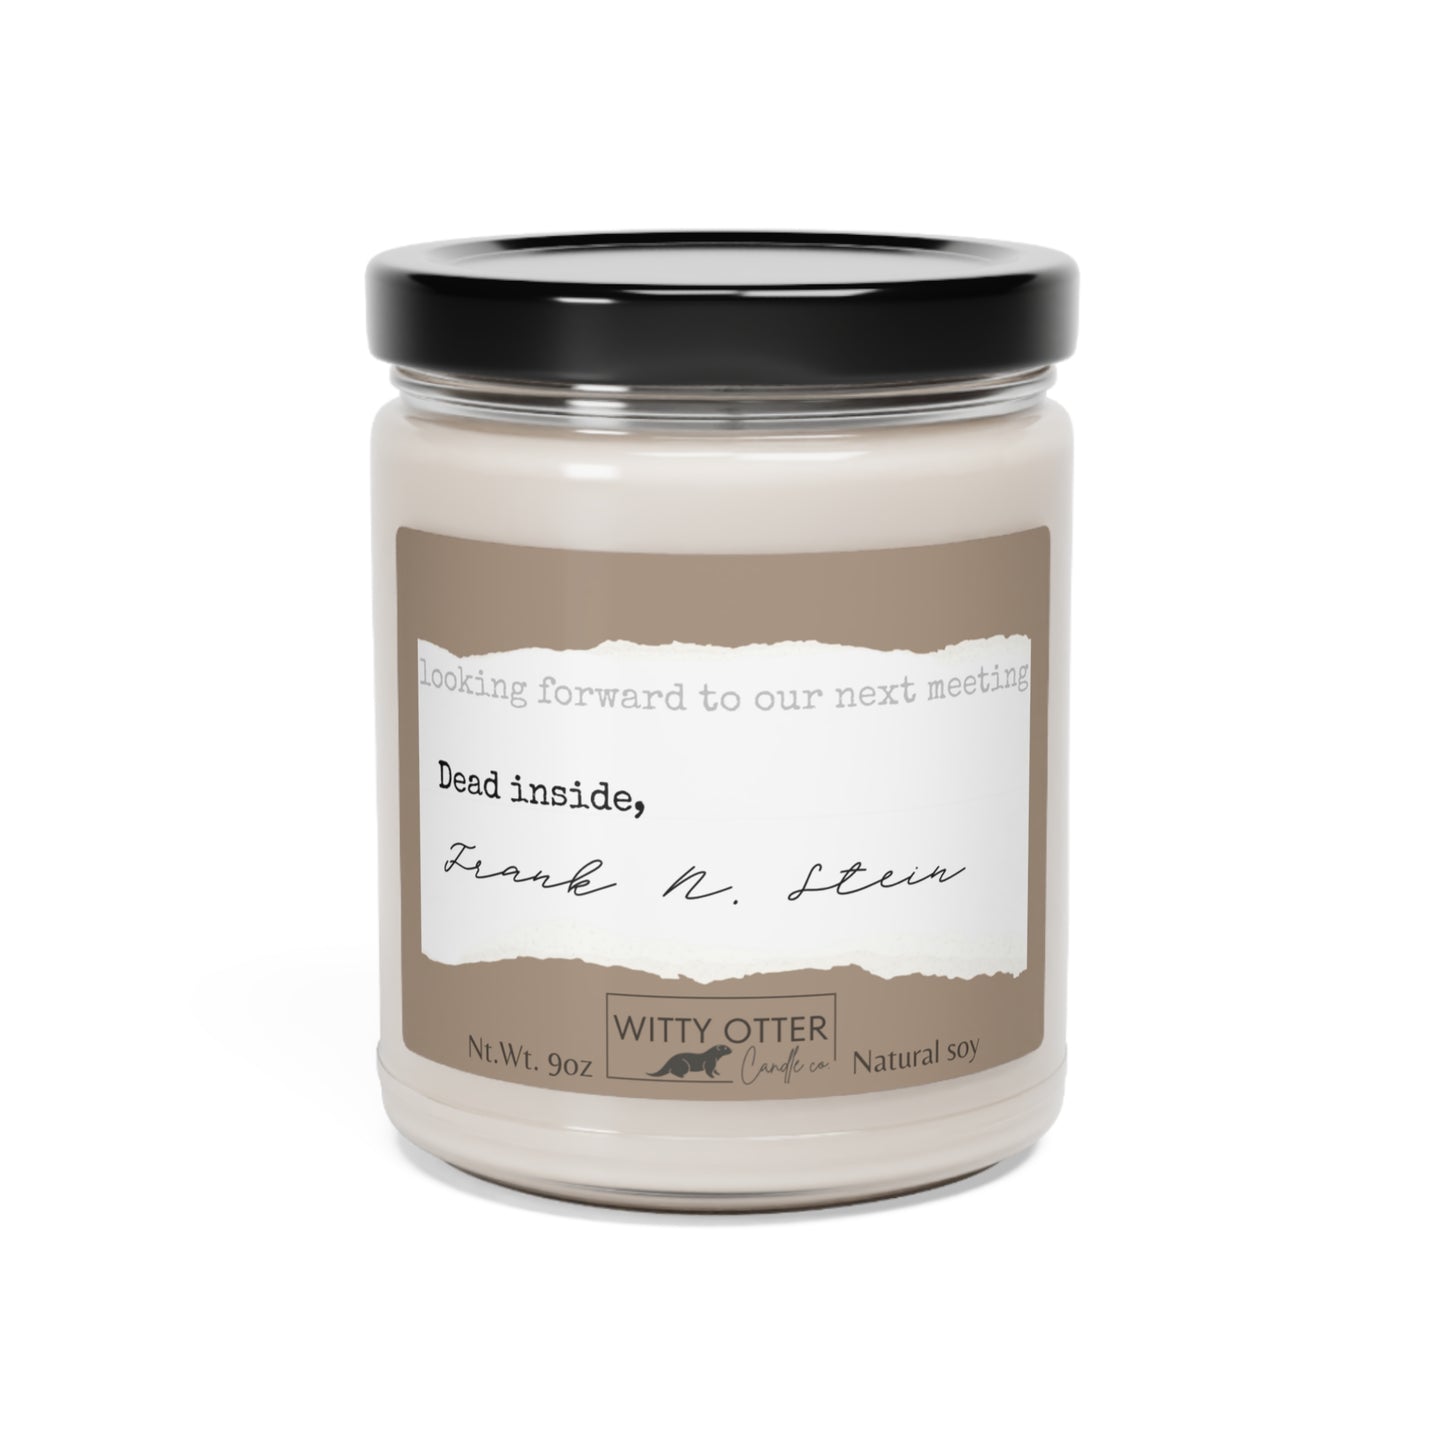 Hilarious office "signature" scented Soy Candle, 9oz - "Dead inside" signed candle